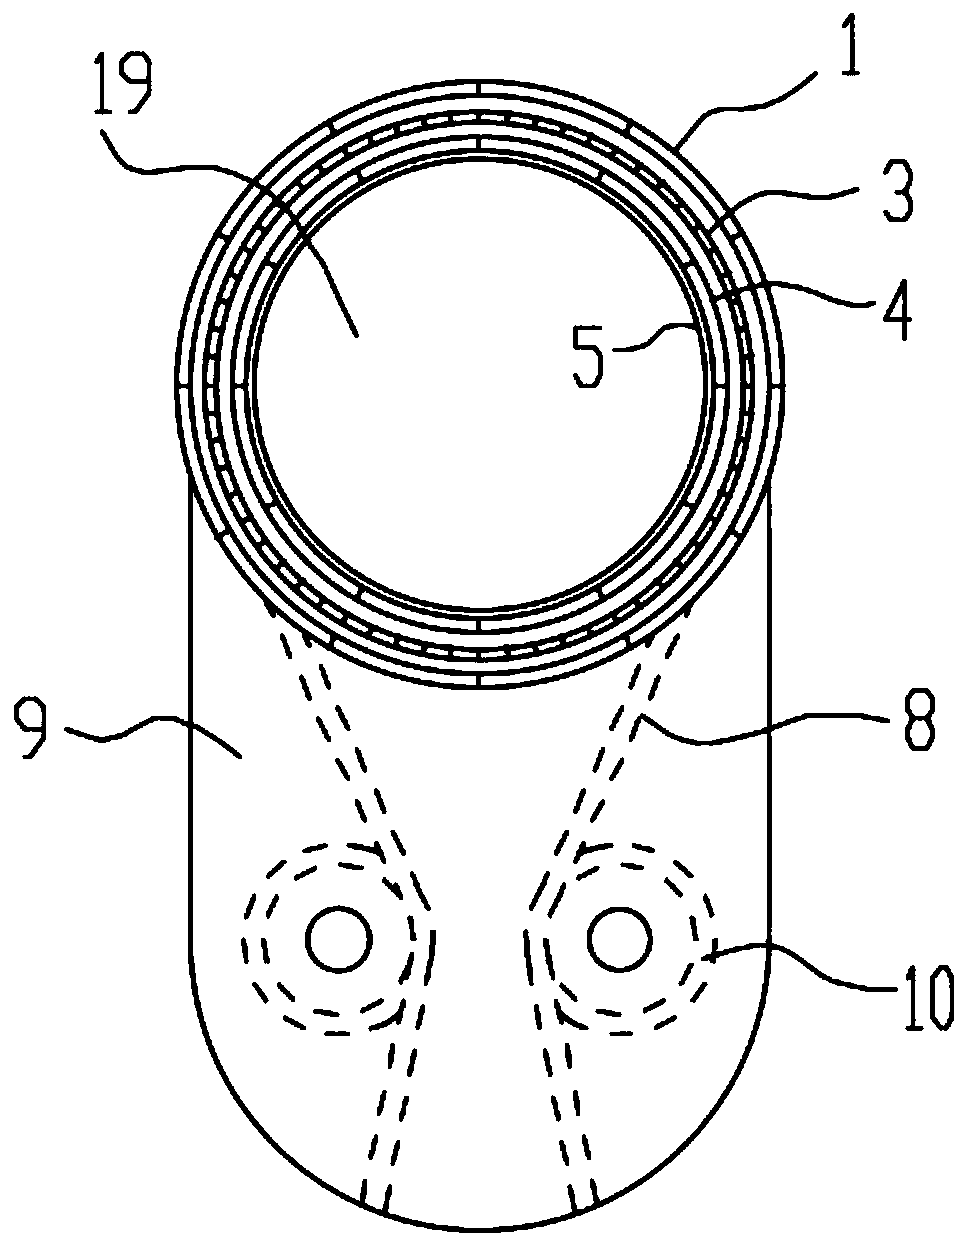 A wire-driven fruit and branch harvesting and shearing device